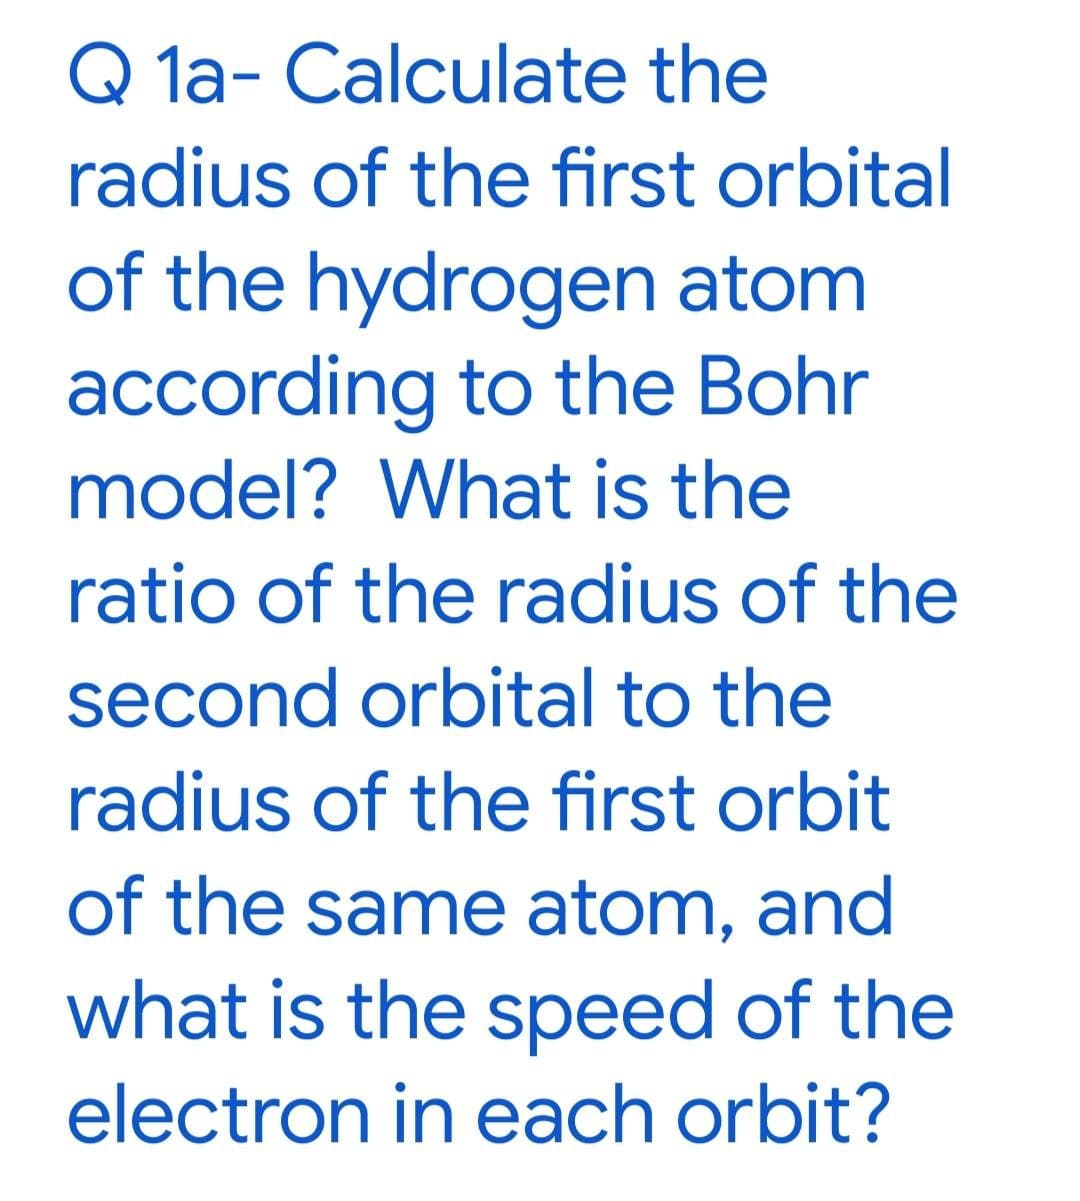 Q 1a- Calculate the
radius of the first orbital
of the hydrogen atom
according to the Bohr
model? What is the
ratio of the radius of the
second orbital to the
radius of the first orbit
of the same atom, and
what is the speed of the
electron in each orbit?
